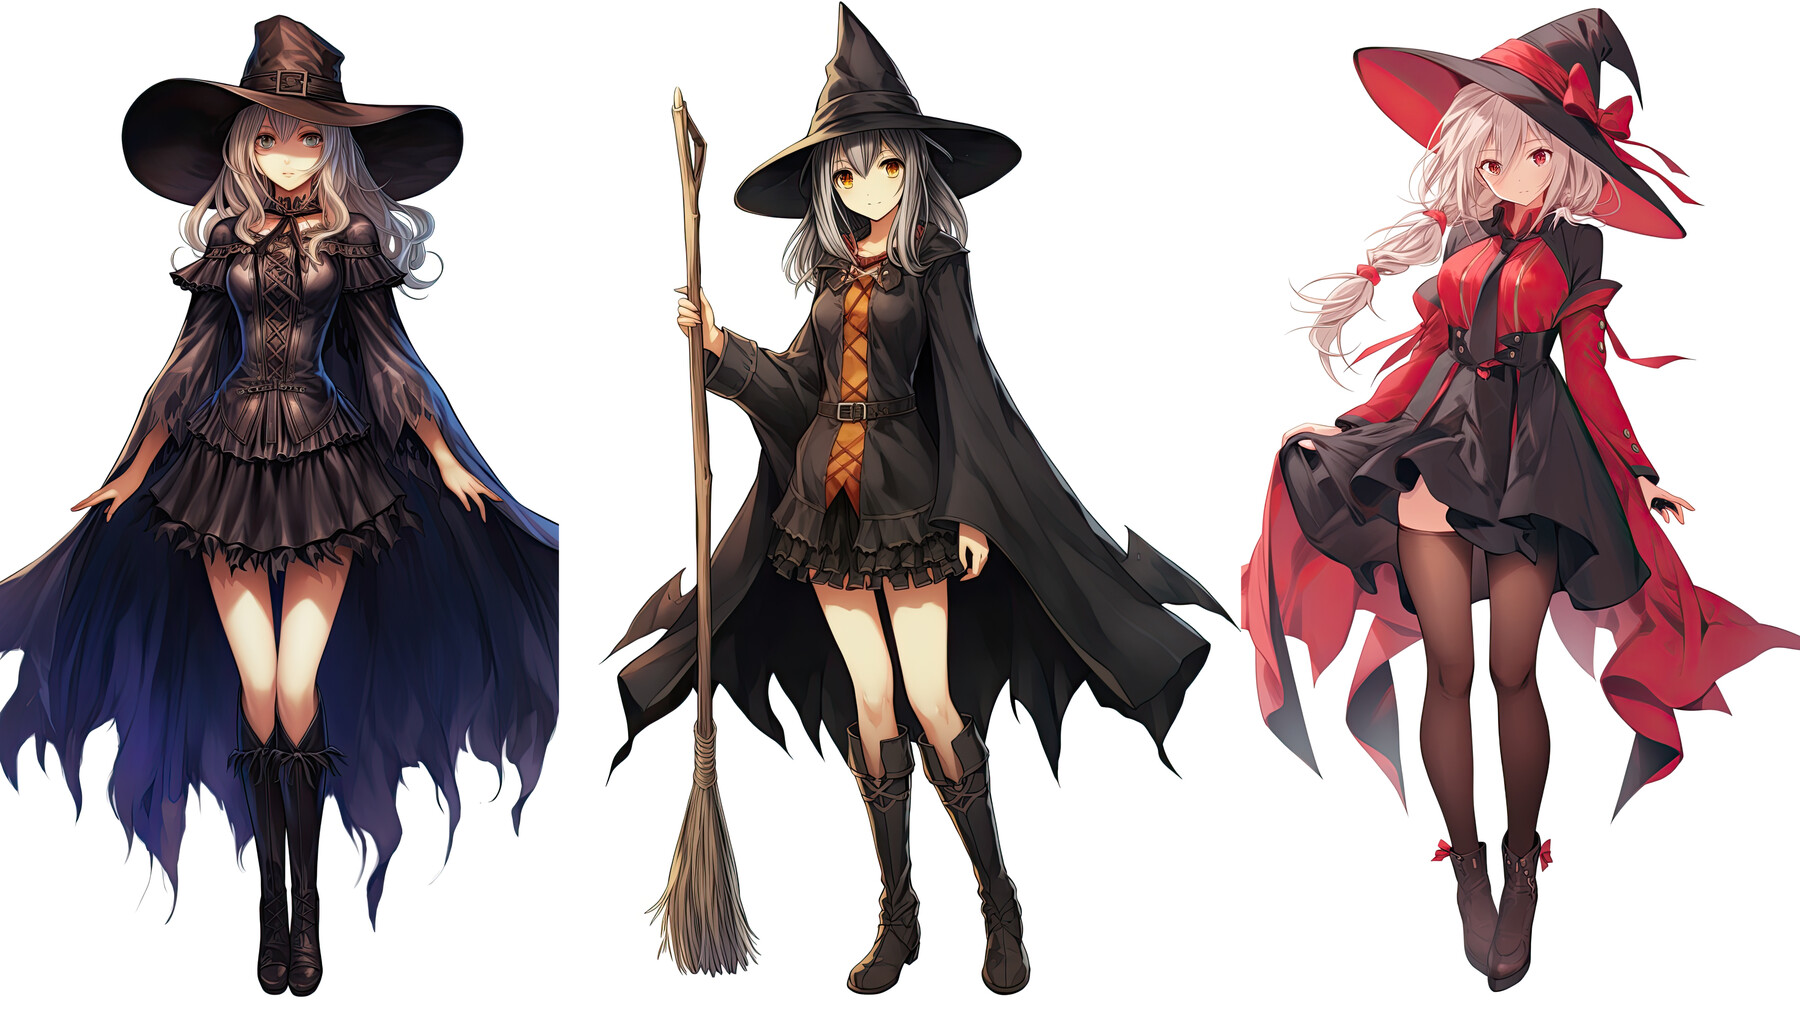 Little Witch Academia TV Anime Character Designs & Halloween Candy Revealed  - Otaku Tale